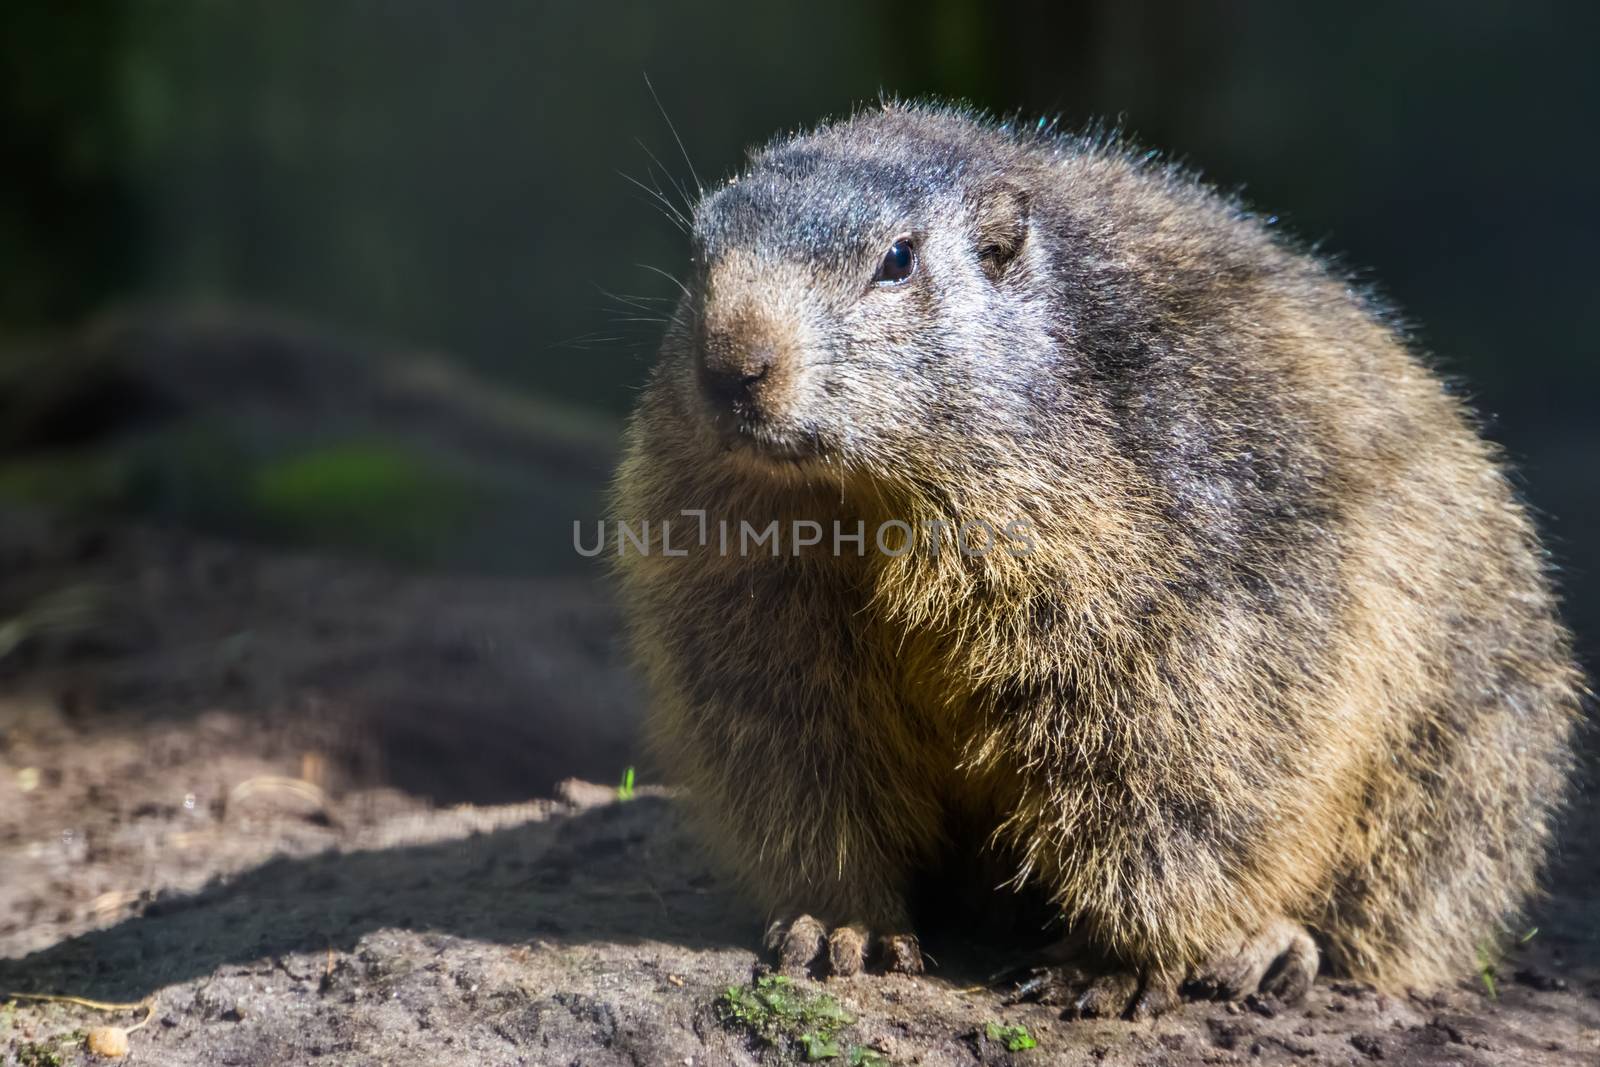 closeup portrait of an alpine marmot, rodent specie, wild squirrel from the alps of europe